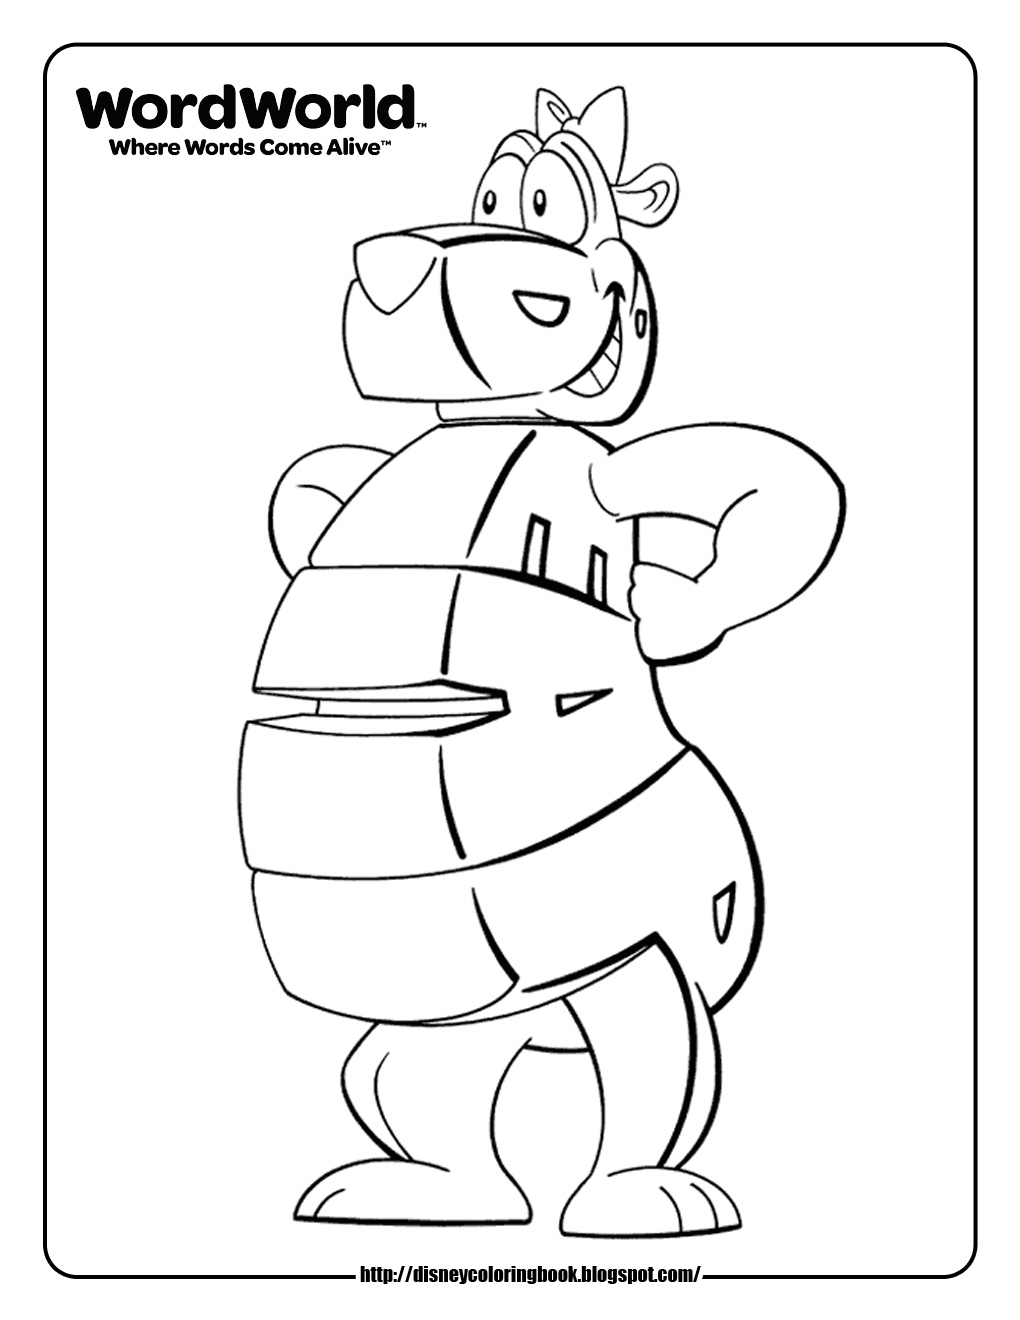 Reduce Reuse Recycle Coloring Pages at GetDrawings | Free download